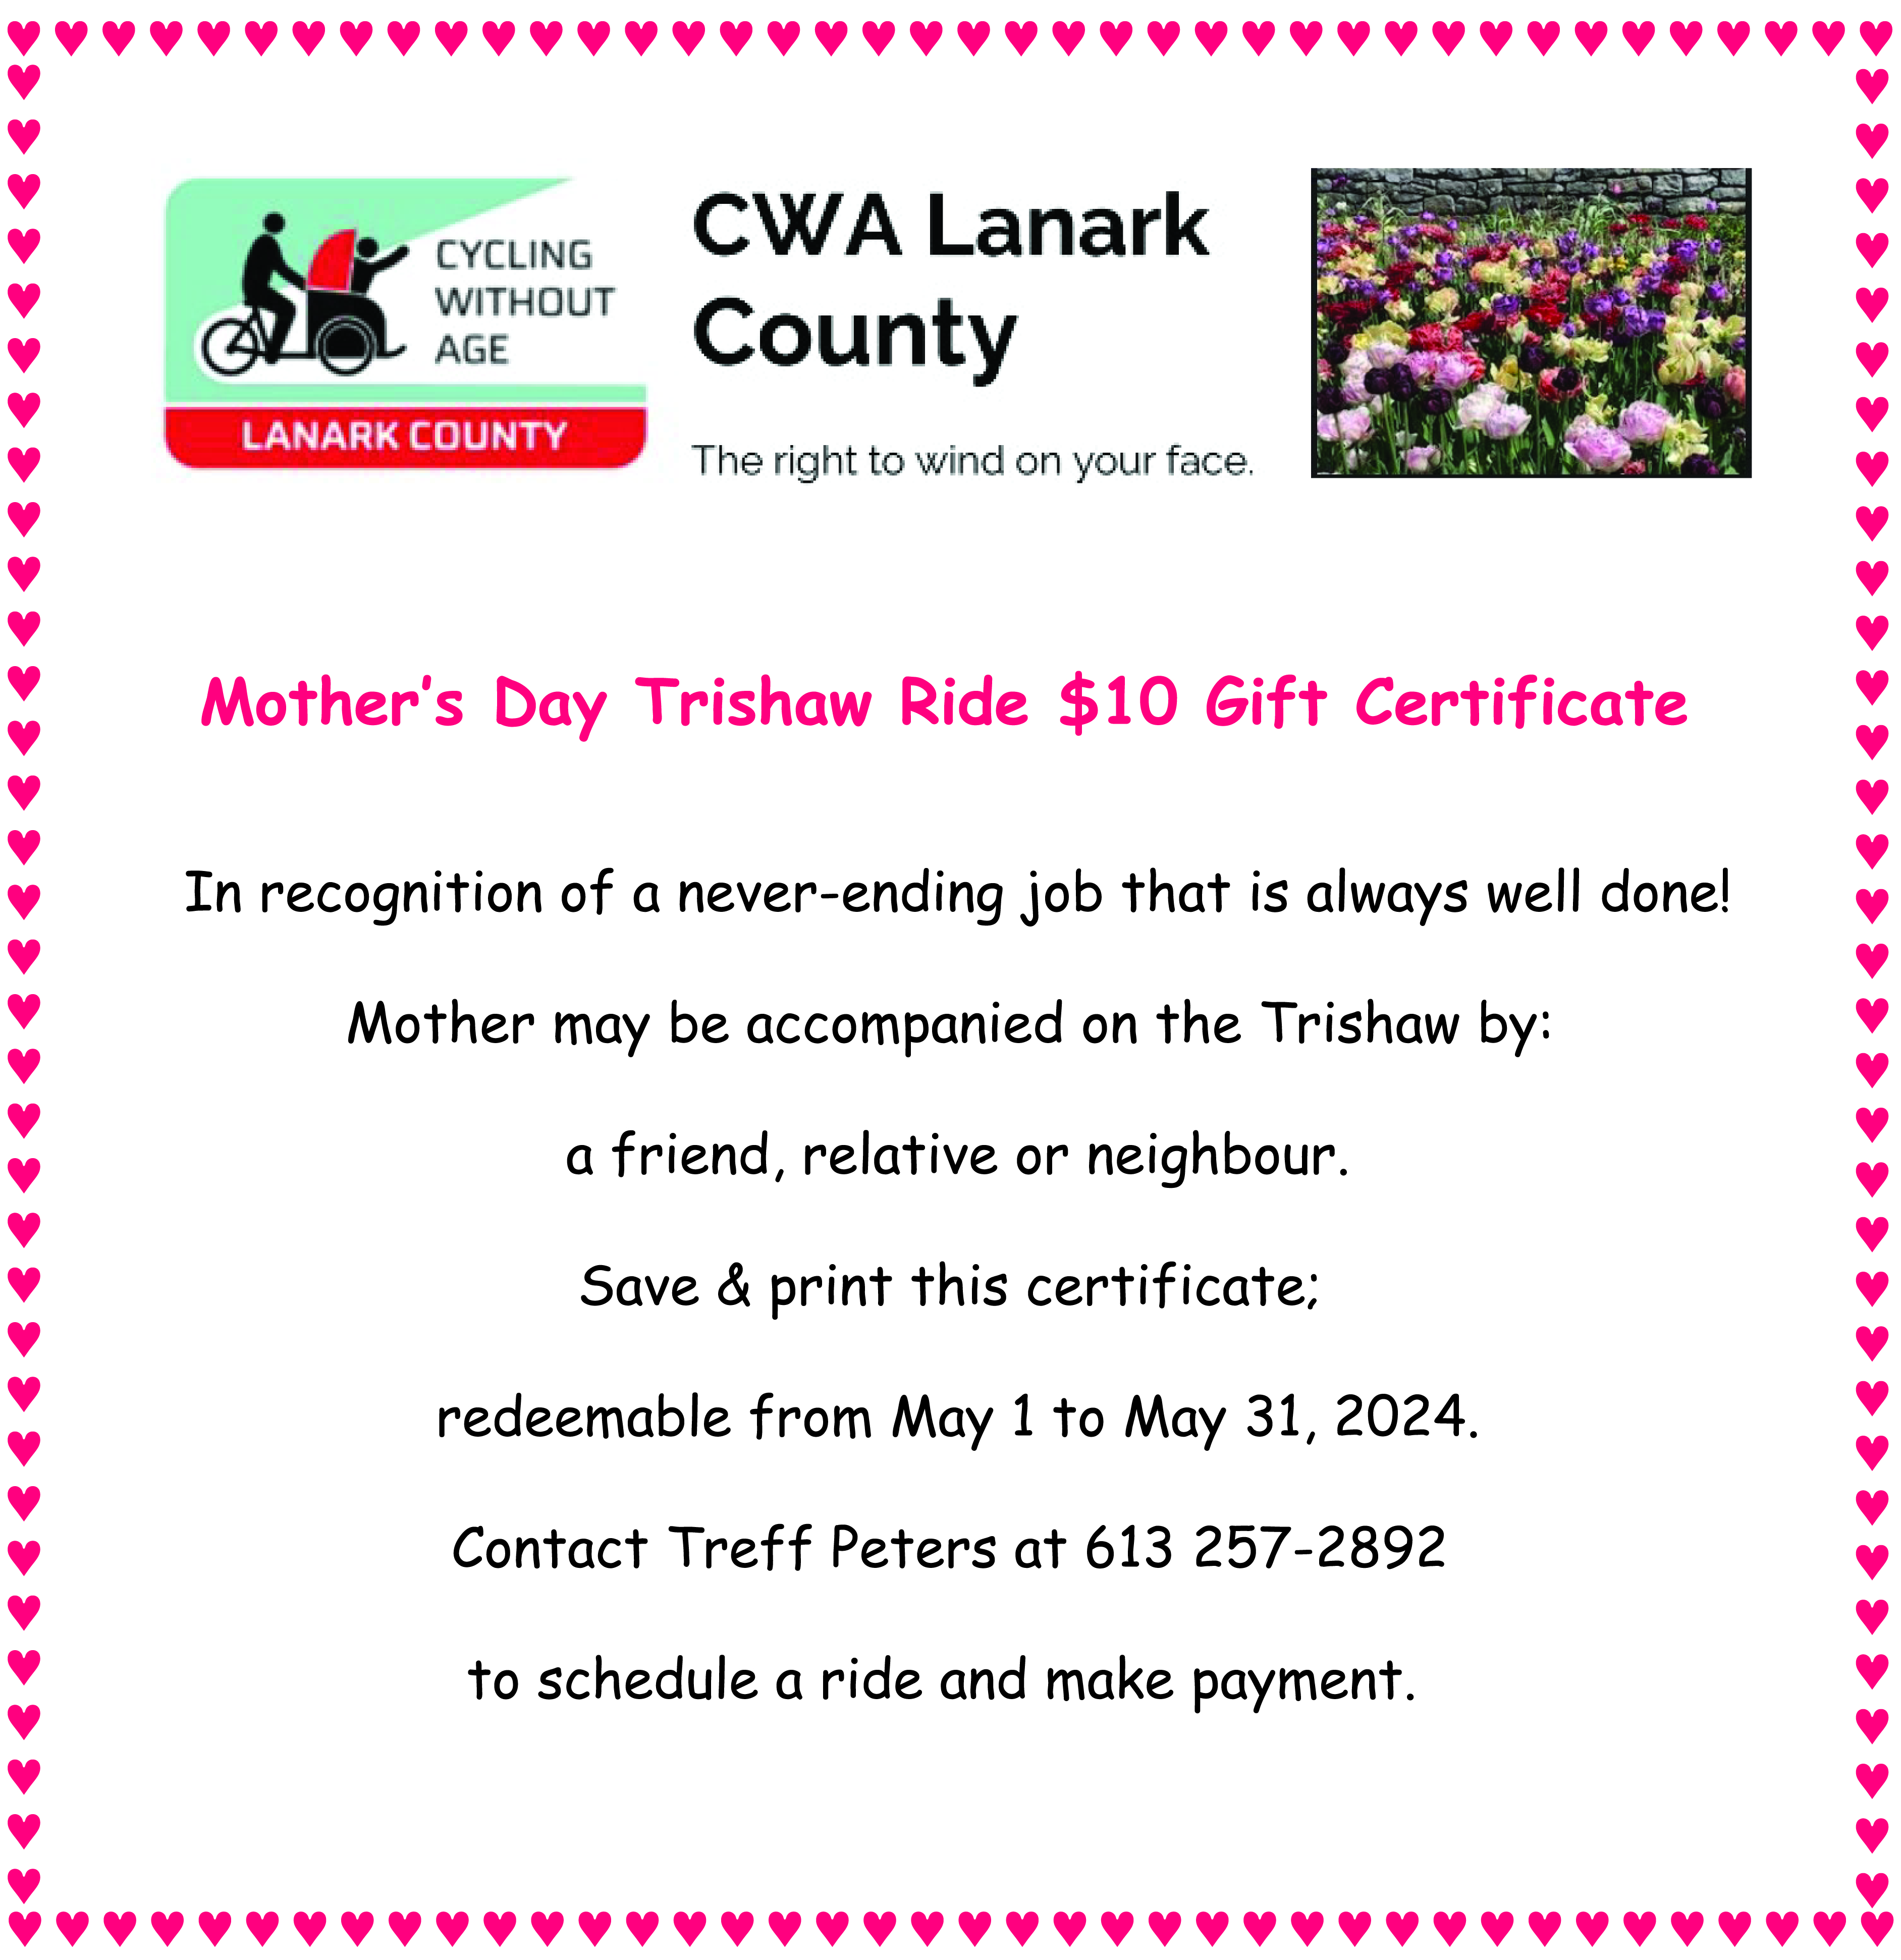 Mother's Day Gift Certificate for a Trishaw Ride